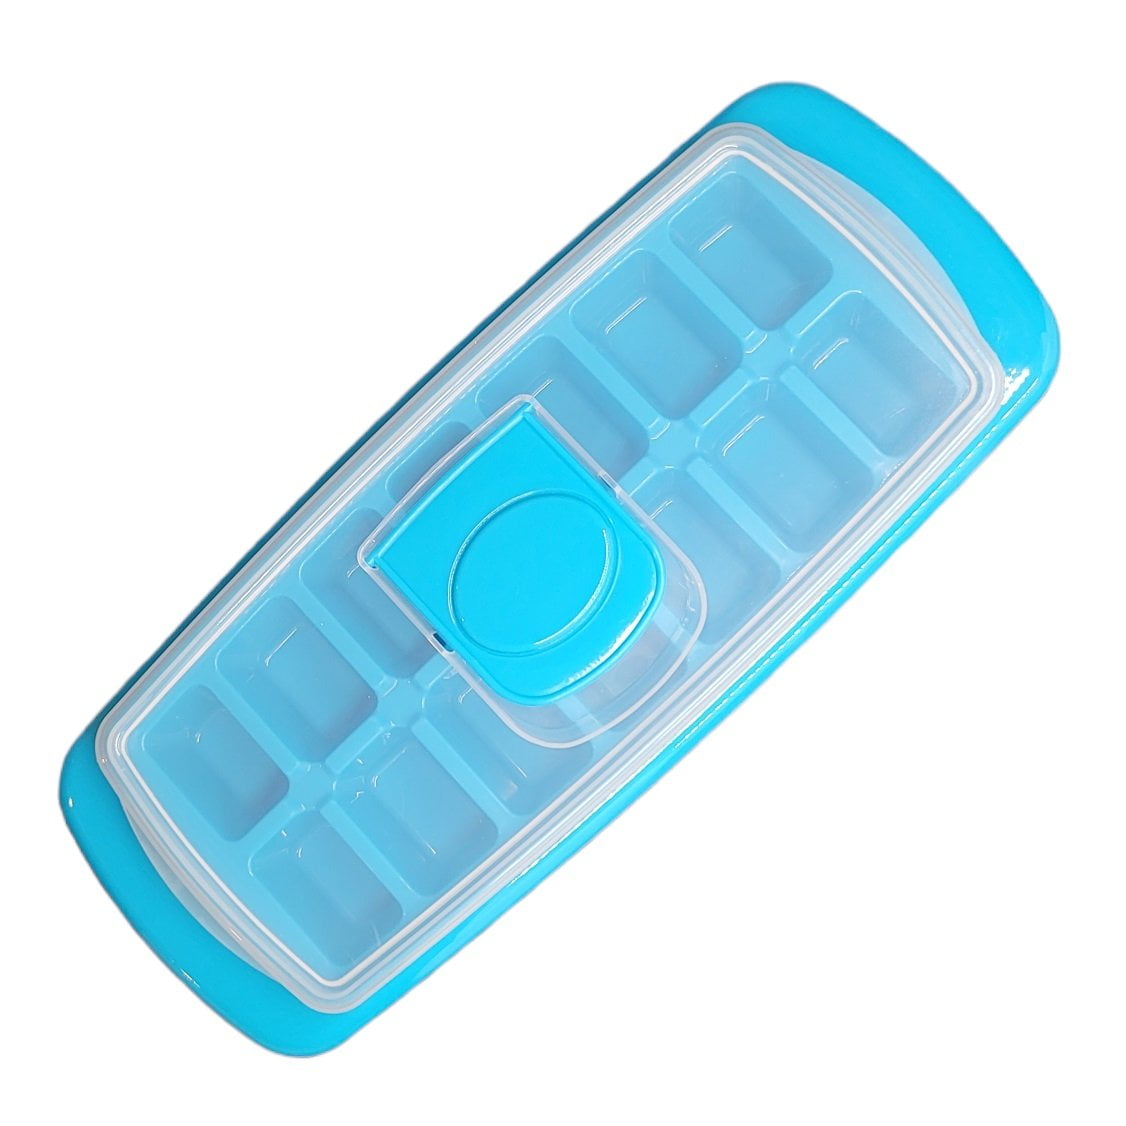 Silicone Ice Cube Tray With 14 Slots, Candy Colors, For Homemade